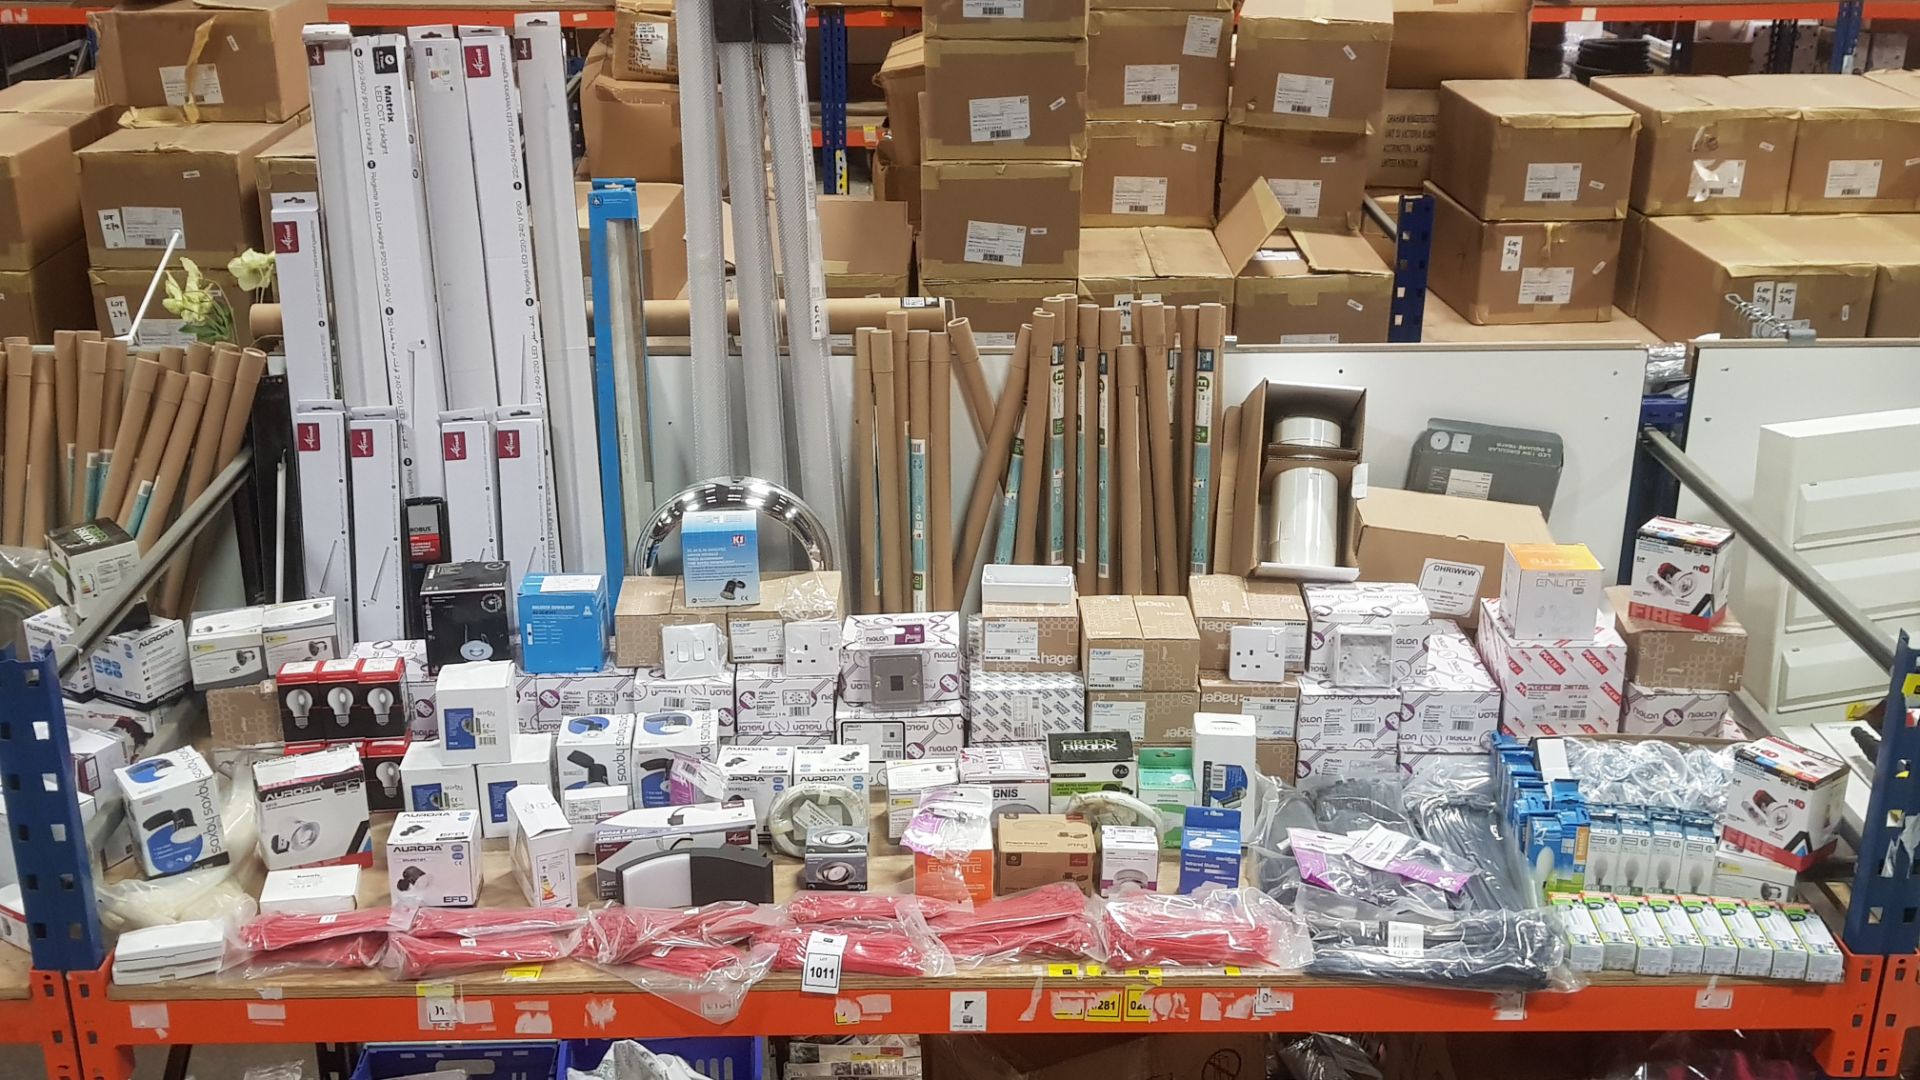 200 + PIECE BRAND NEW COMMERCIAL / HOMEWARE ELECTRICAL ITEMS TO INCLUDE KING SHIELD MAINS VOLTAGE